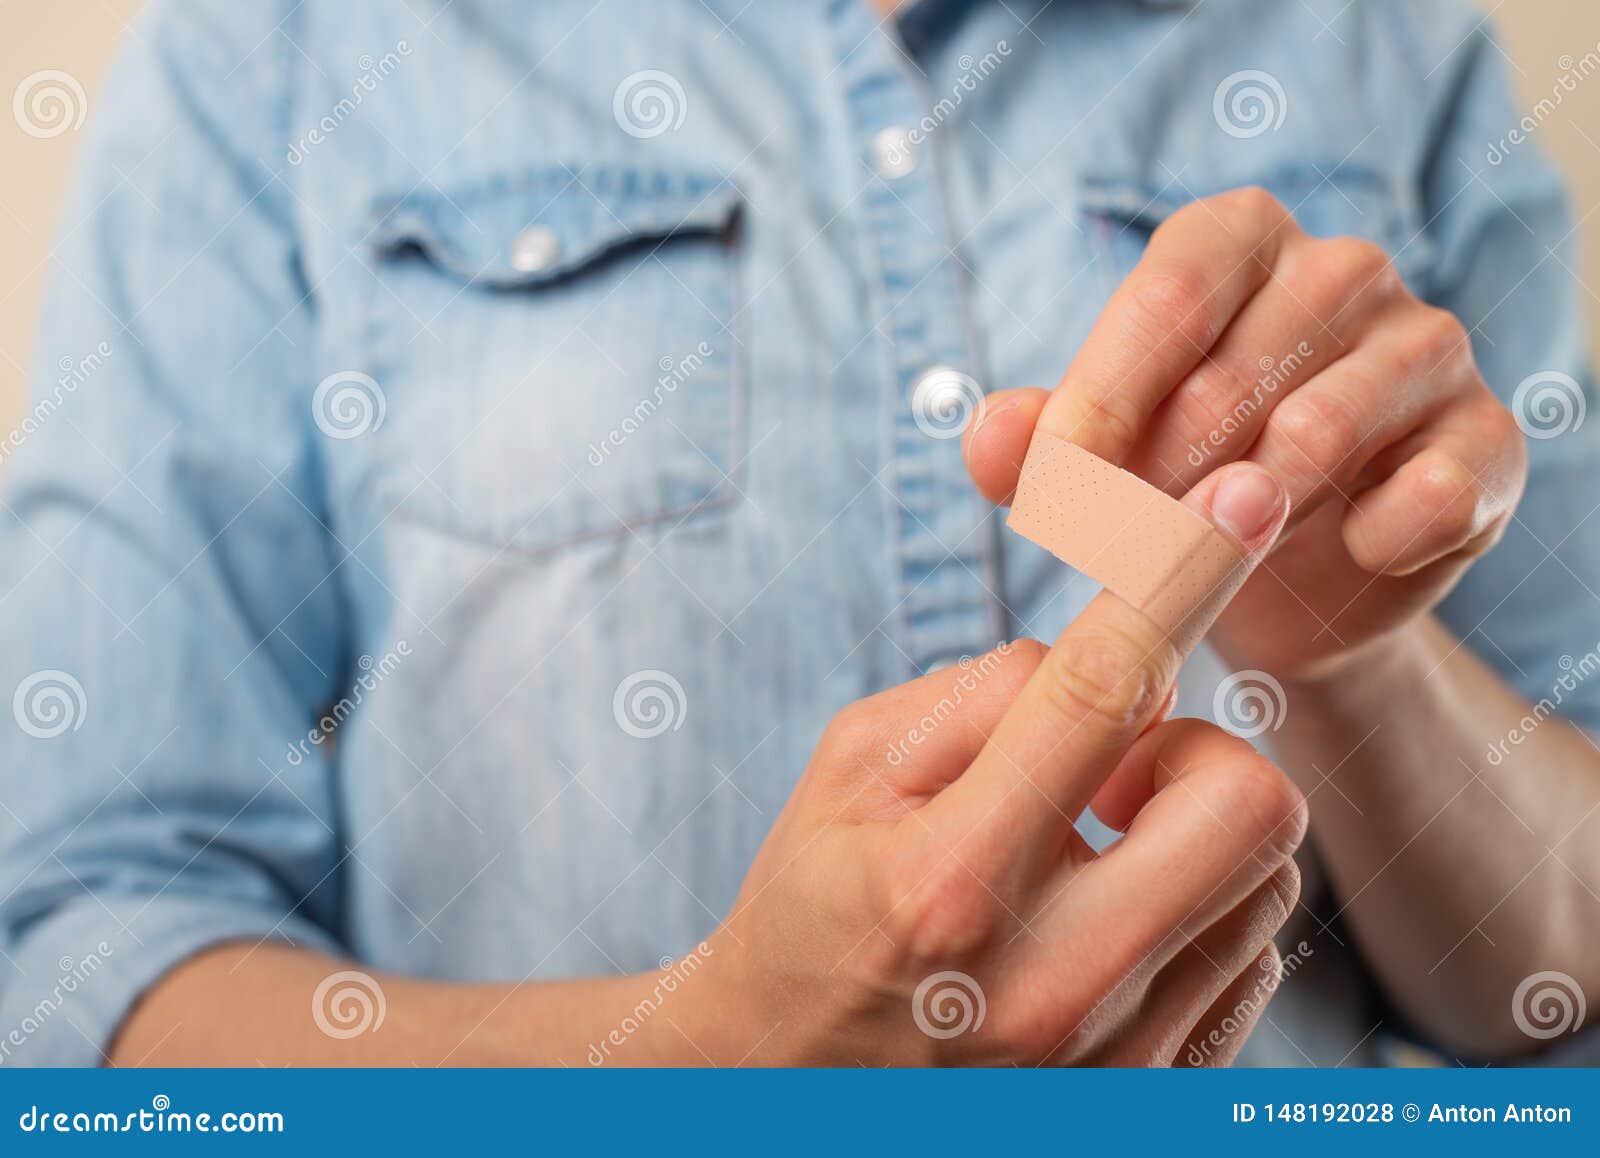 the girl holds and glues the patch on the hand, on the wound, treatment, throwing while smoking